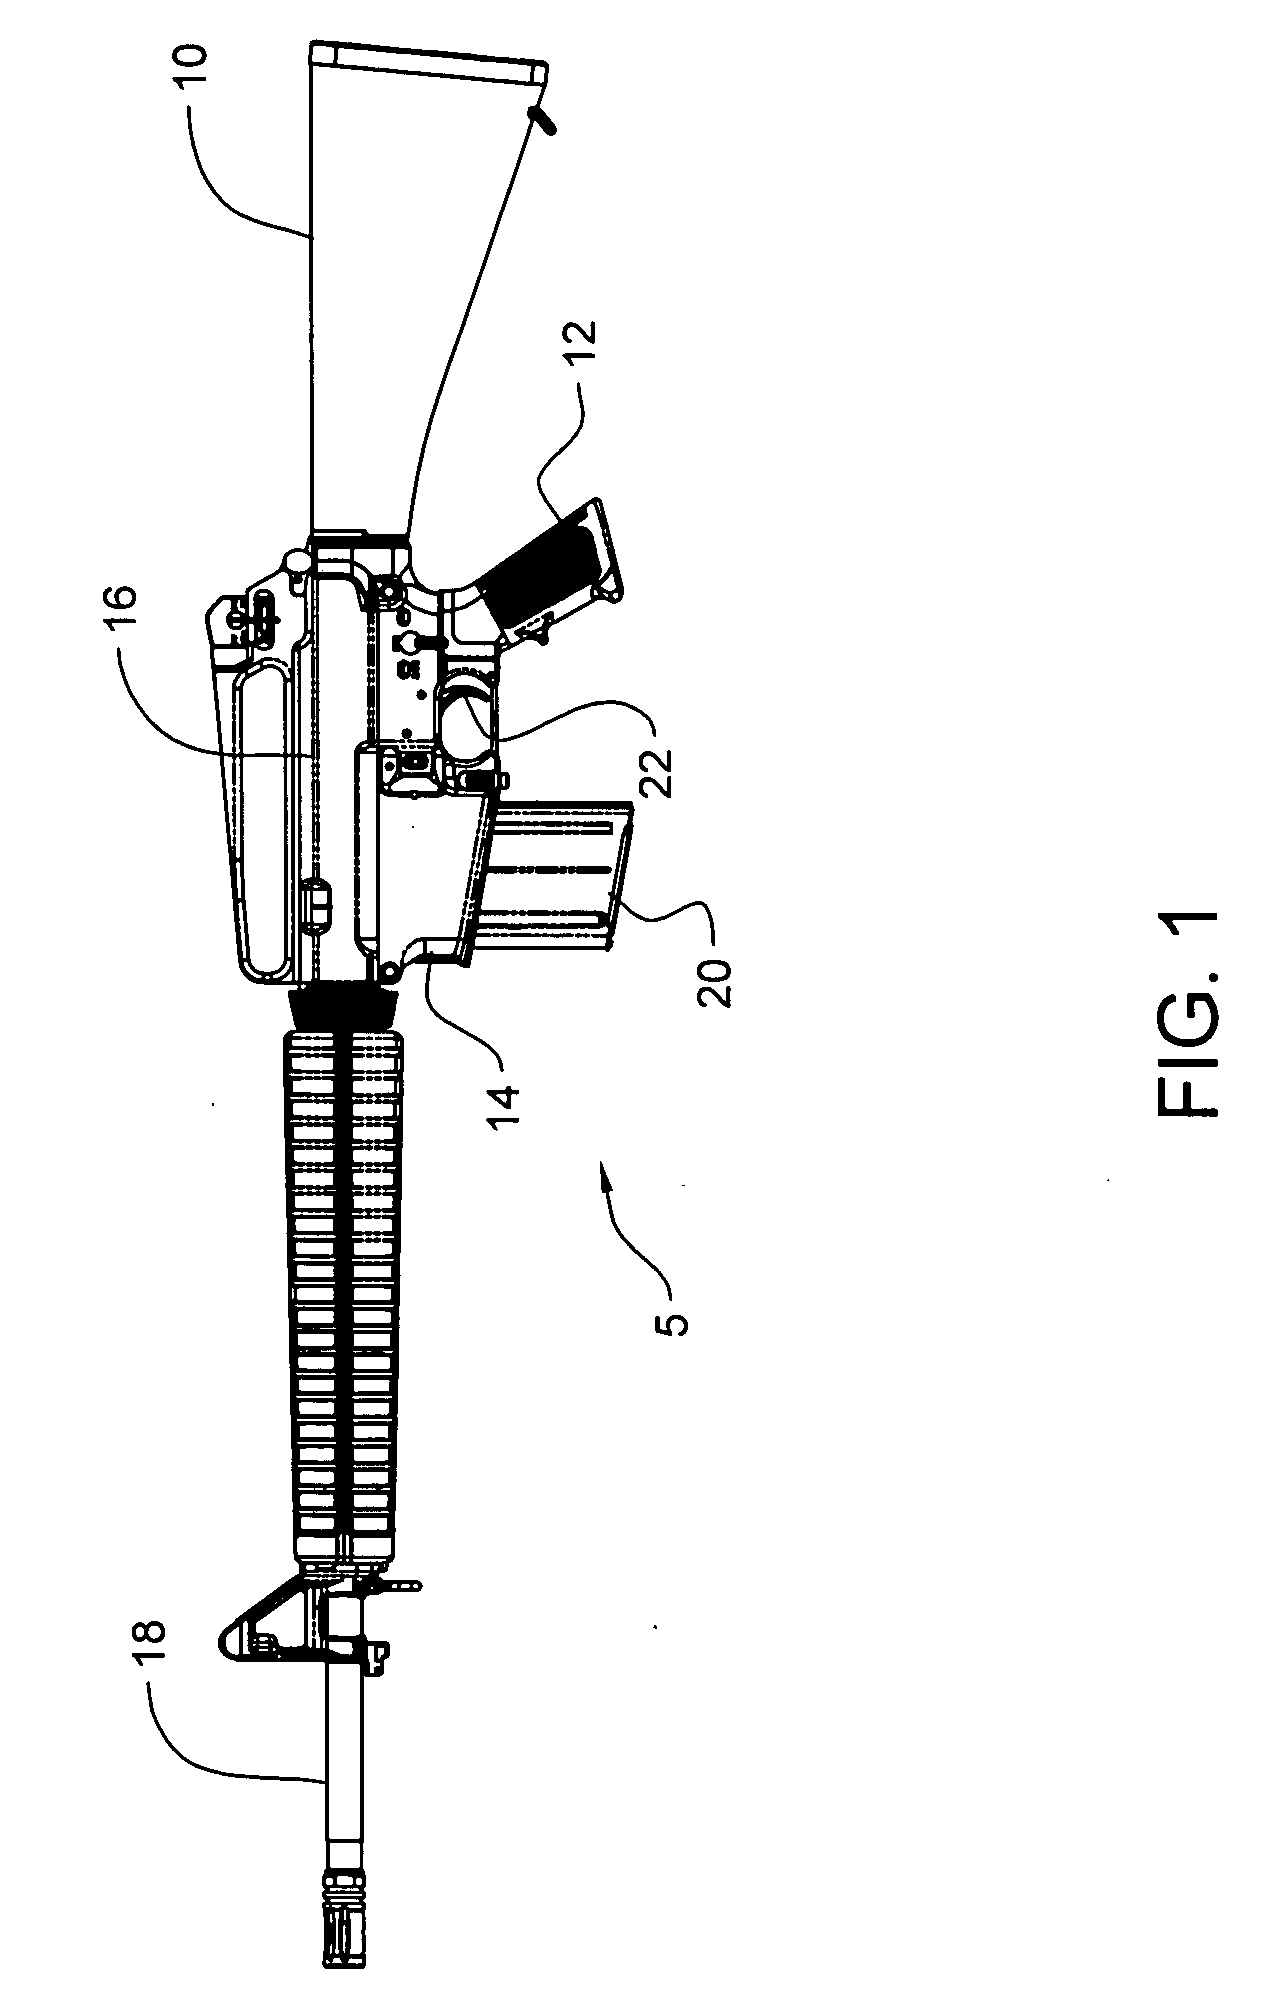 Receiver assembly for firearm